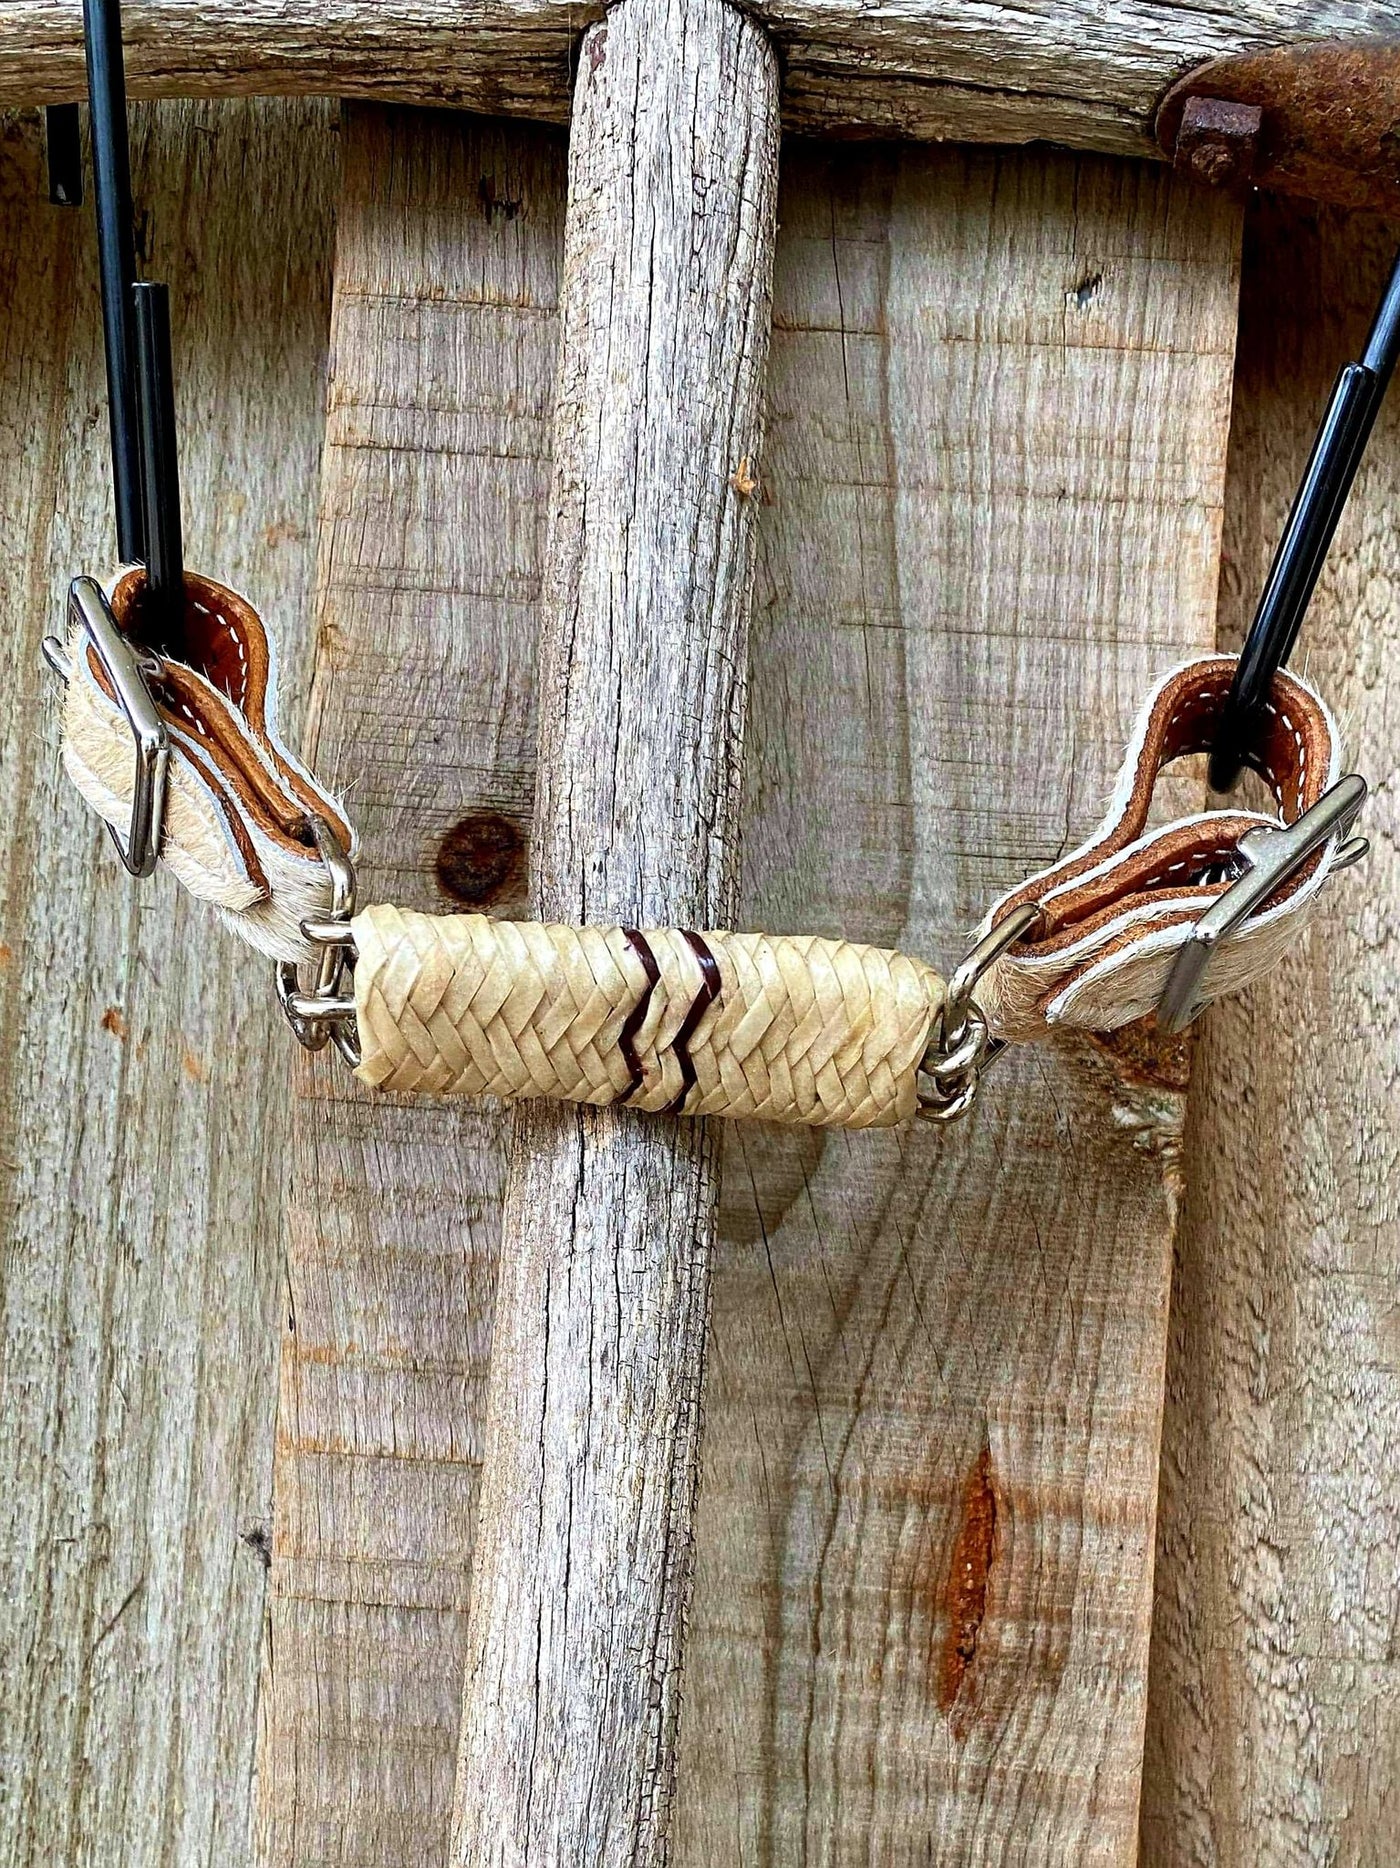 Curb Strap - Curb strap with hair on cowhide ends with rawhide braided covered chain. Adjusts 7" to 9".